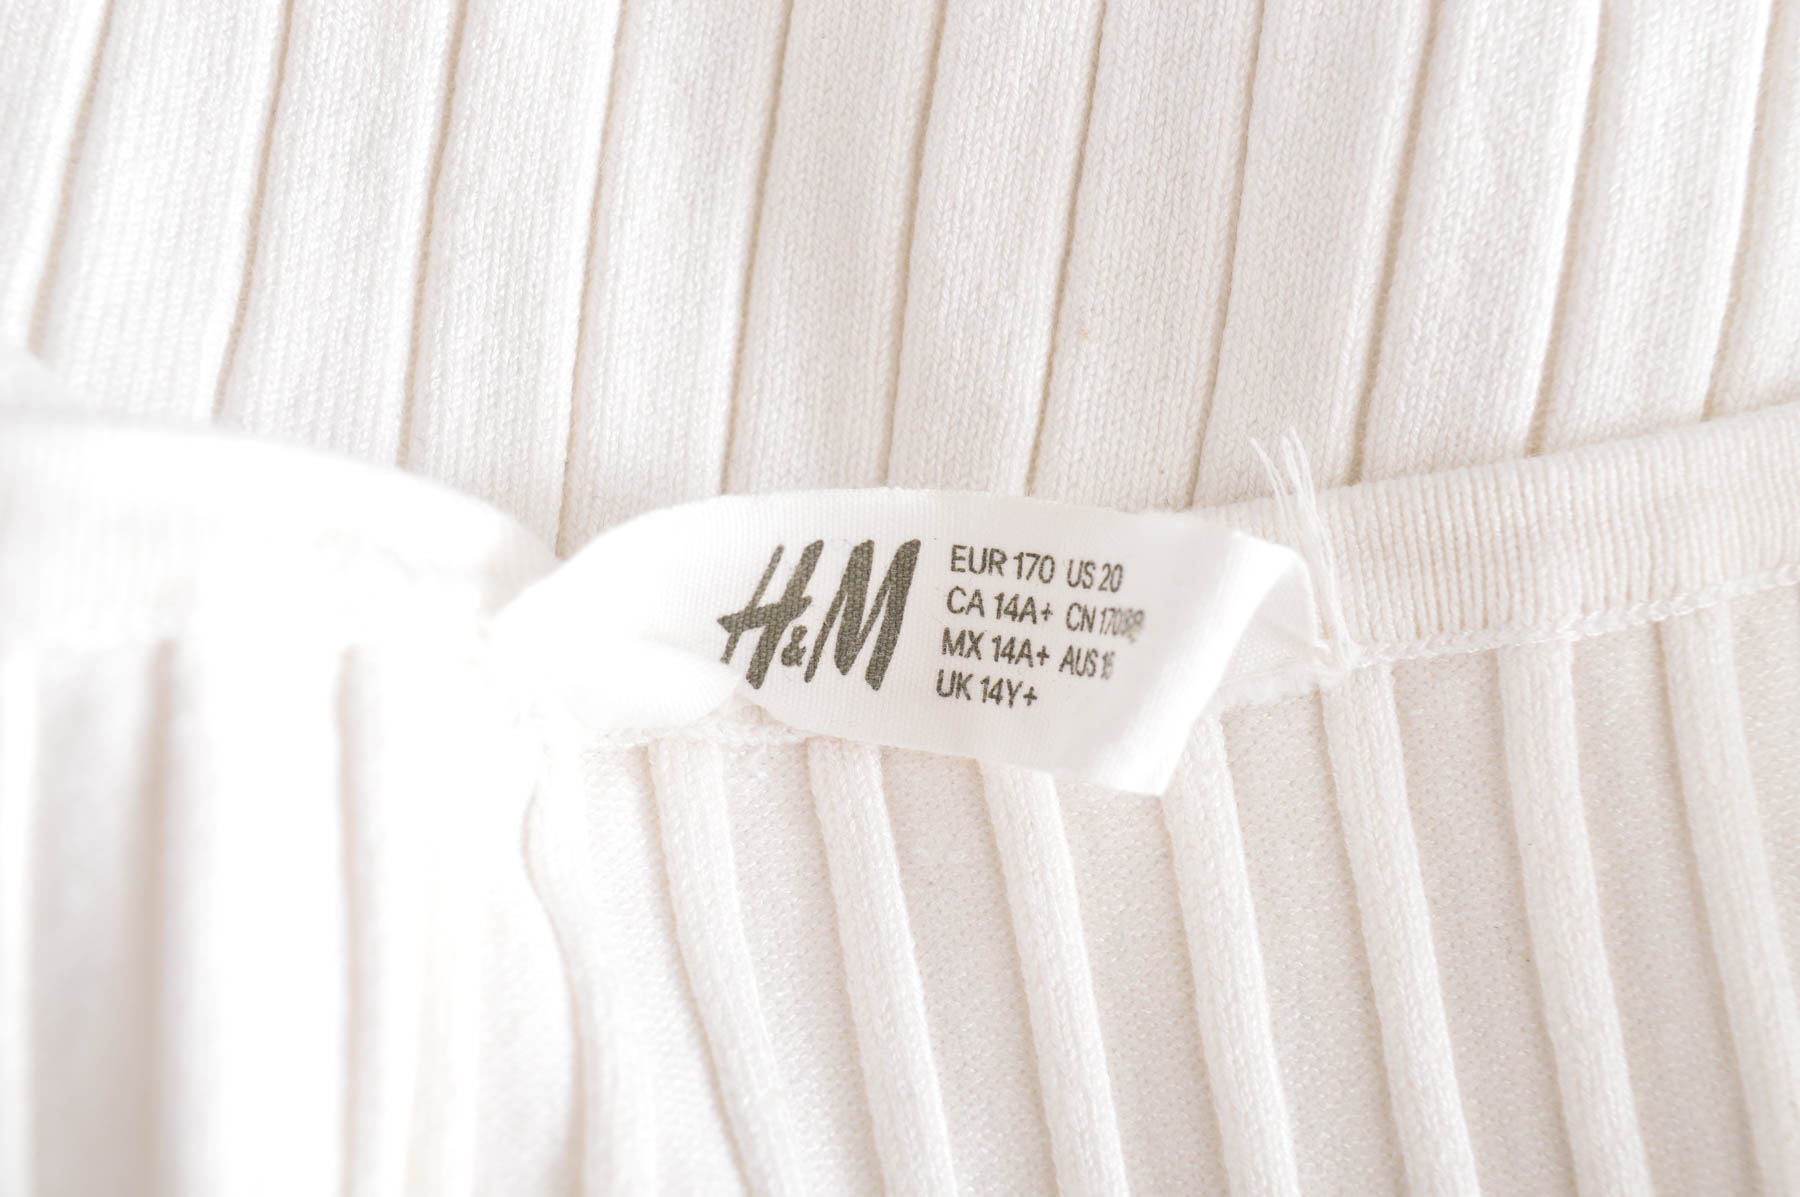 Sweaters for Girl - H&M - 2